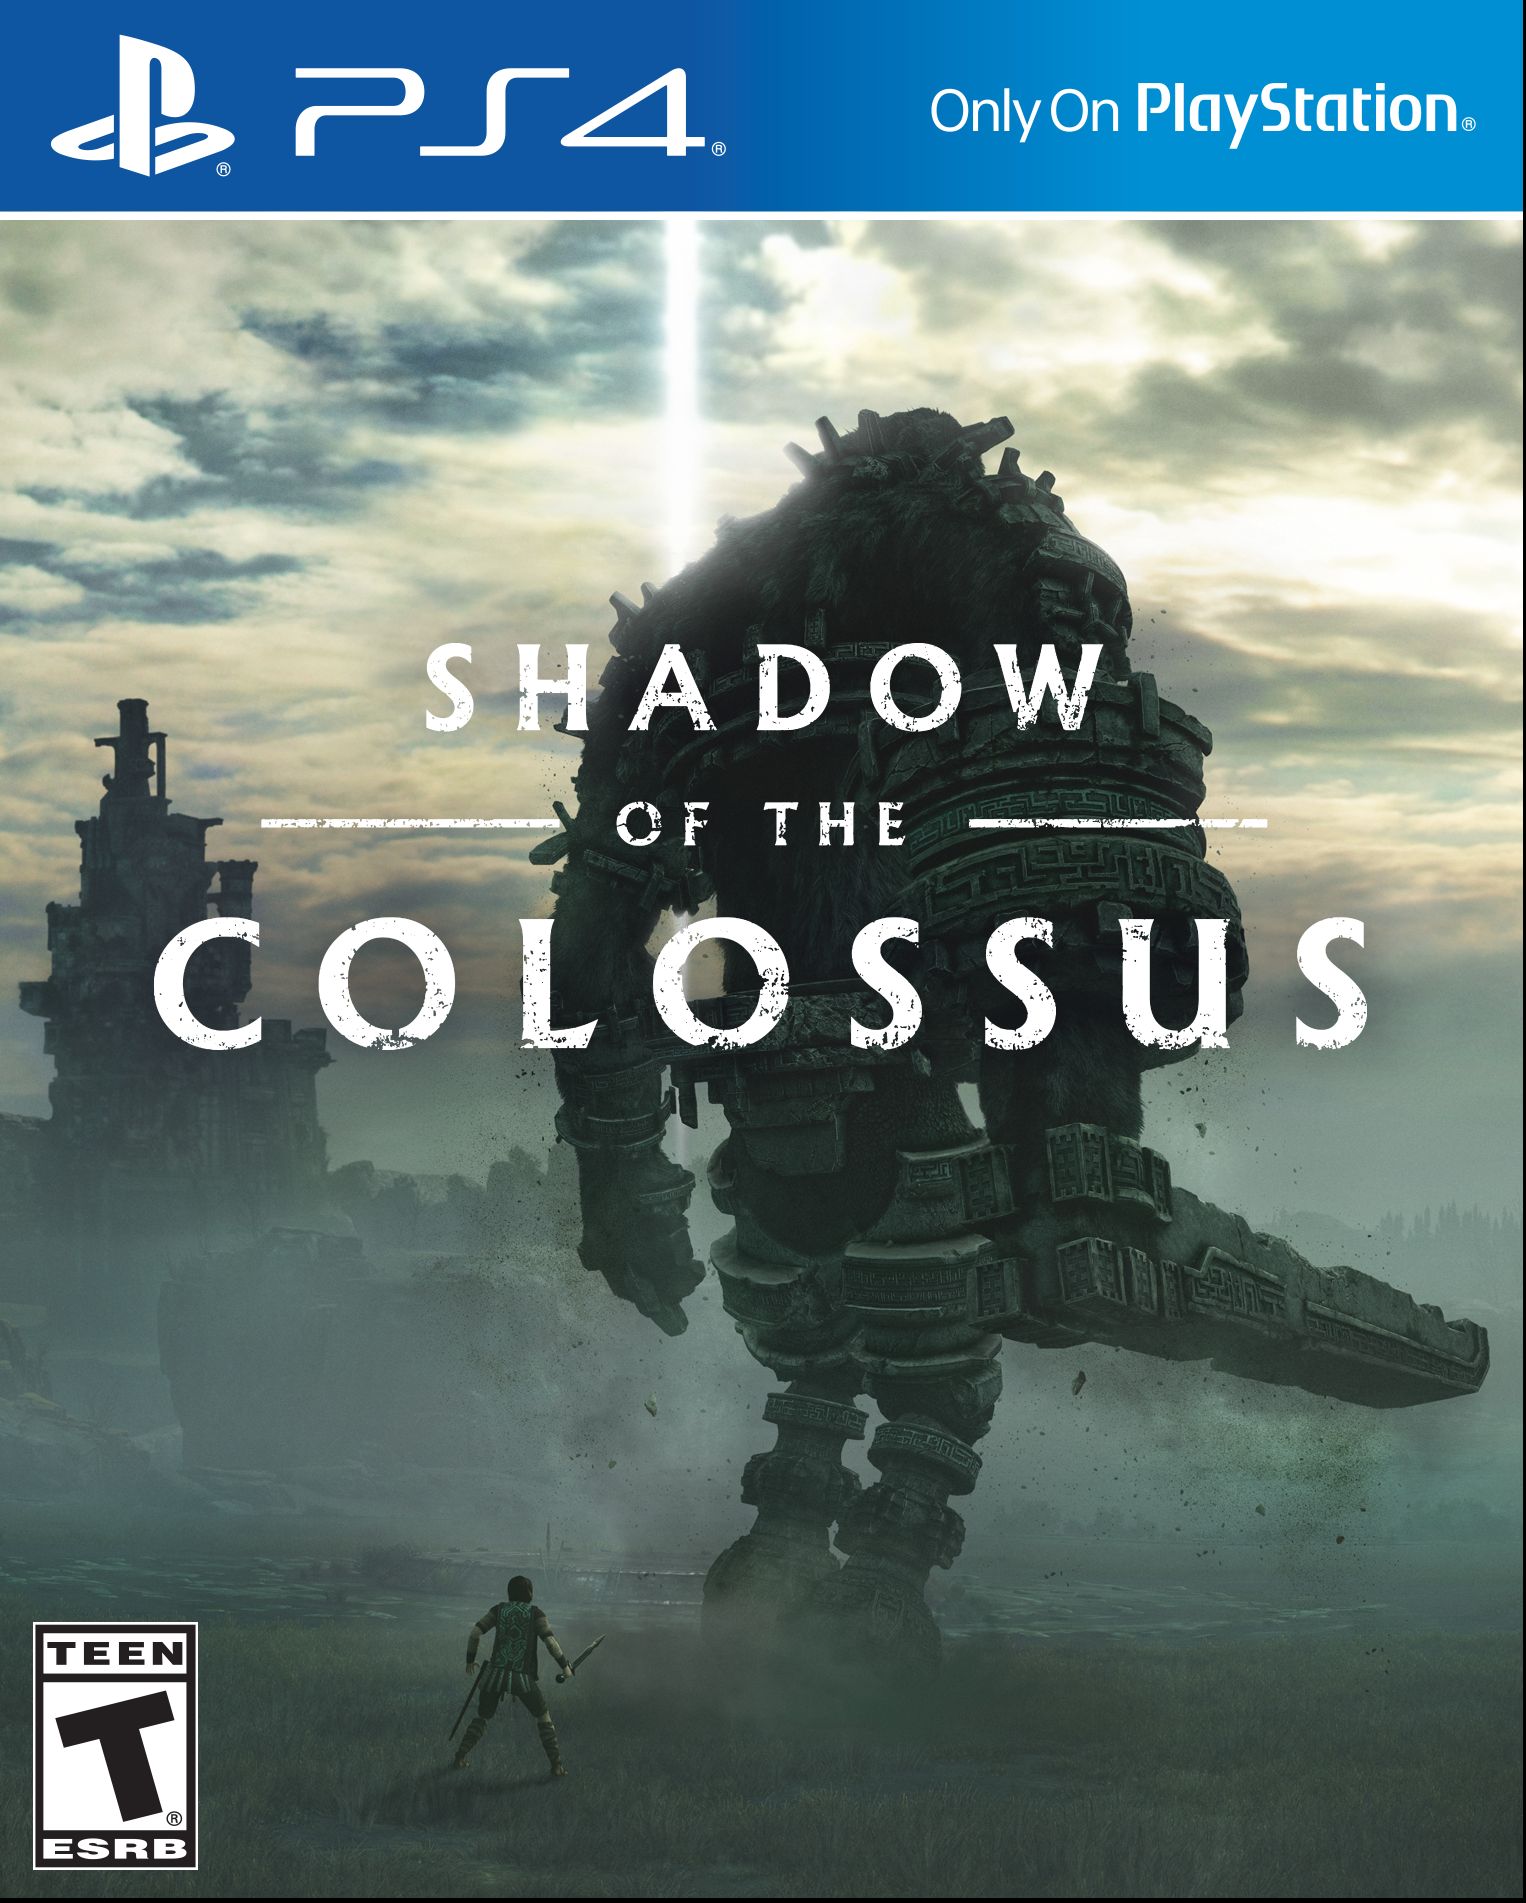 Ico & Sotc Collection PS3 alternate Cover  Shadow of the colossus, Colossus,  Shadow